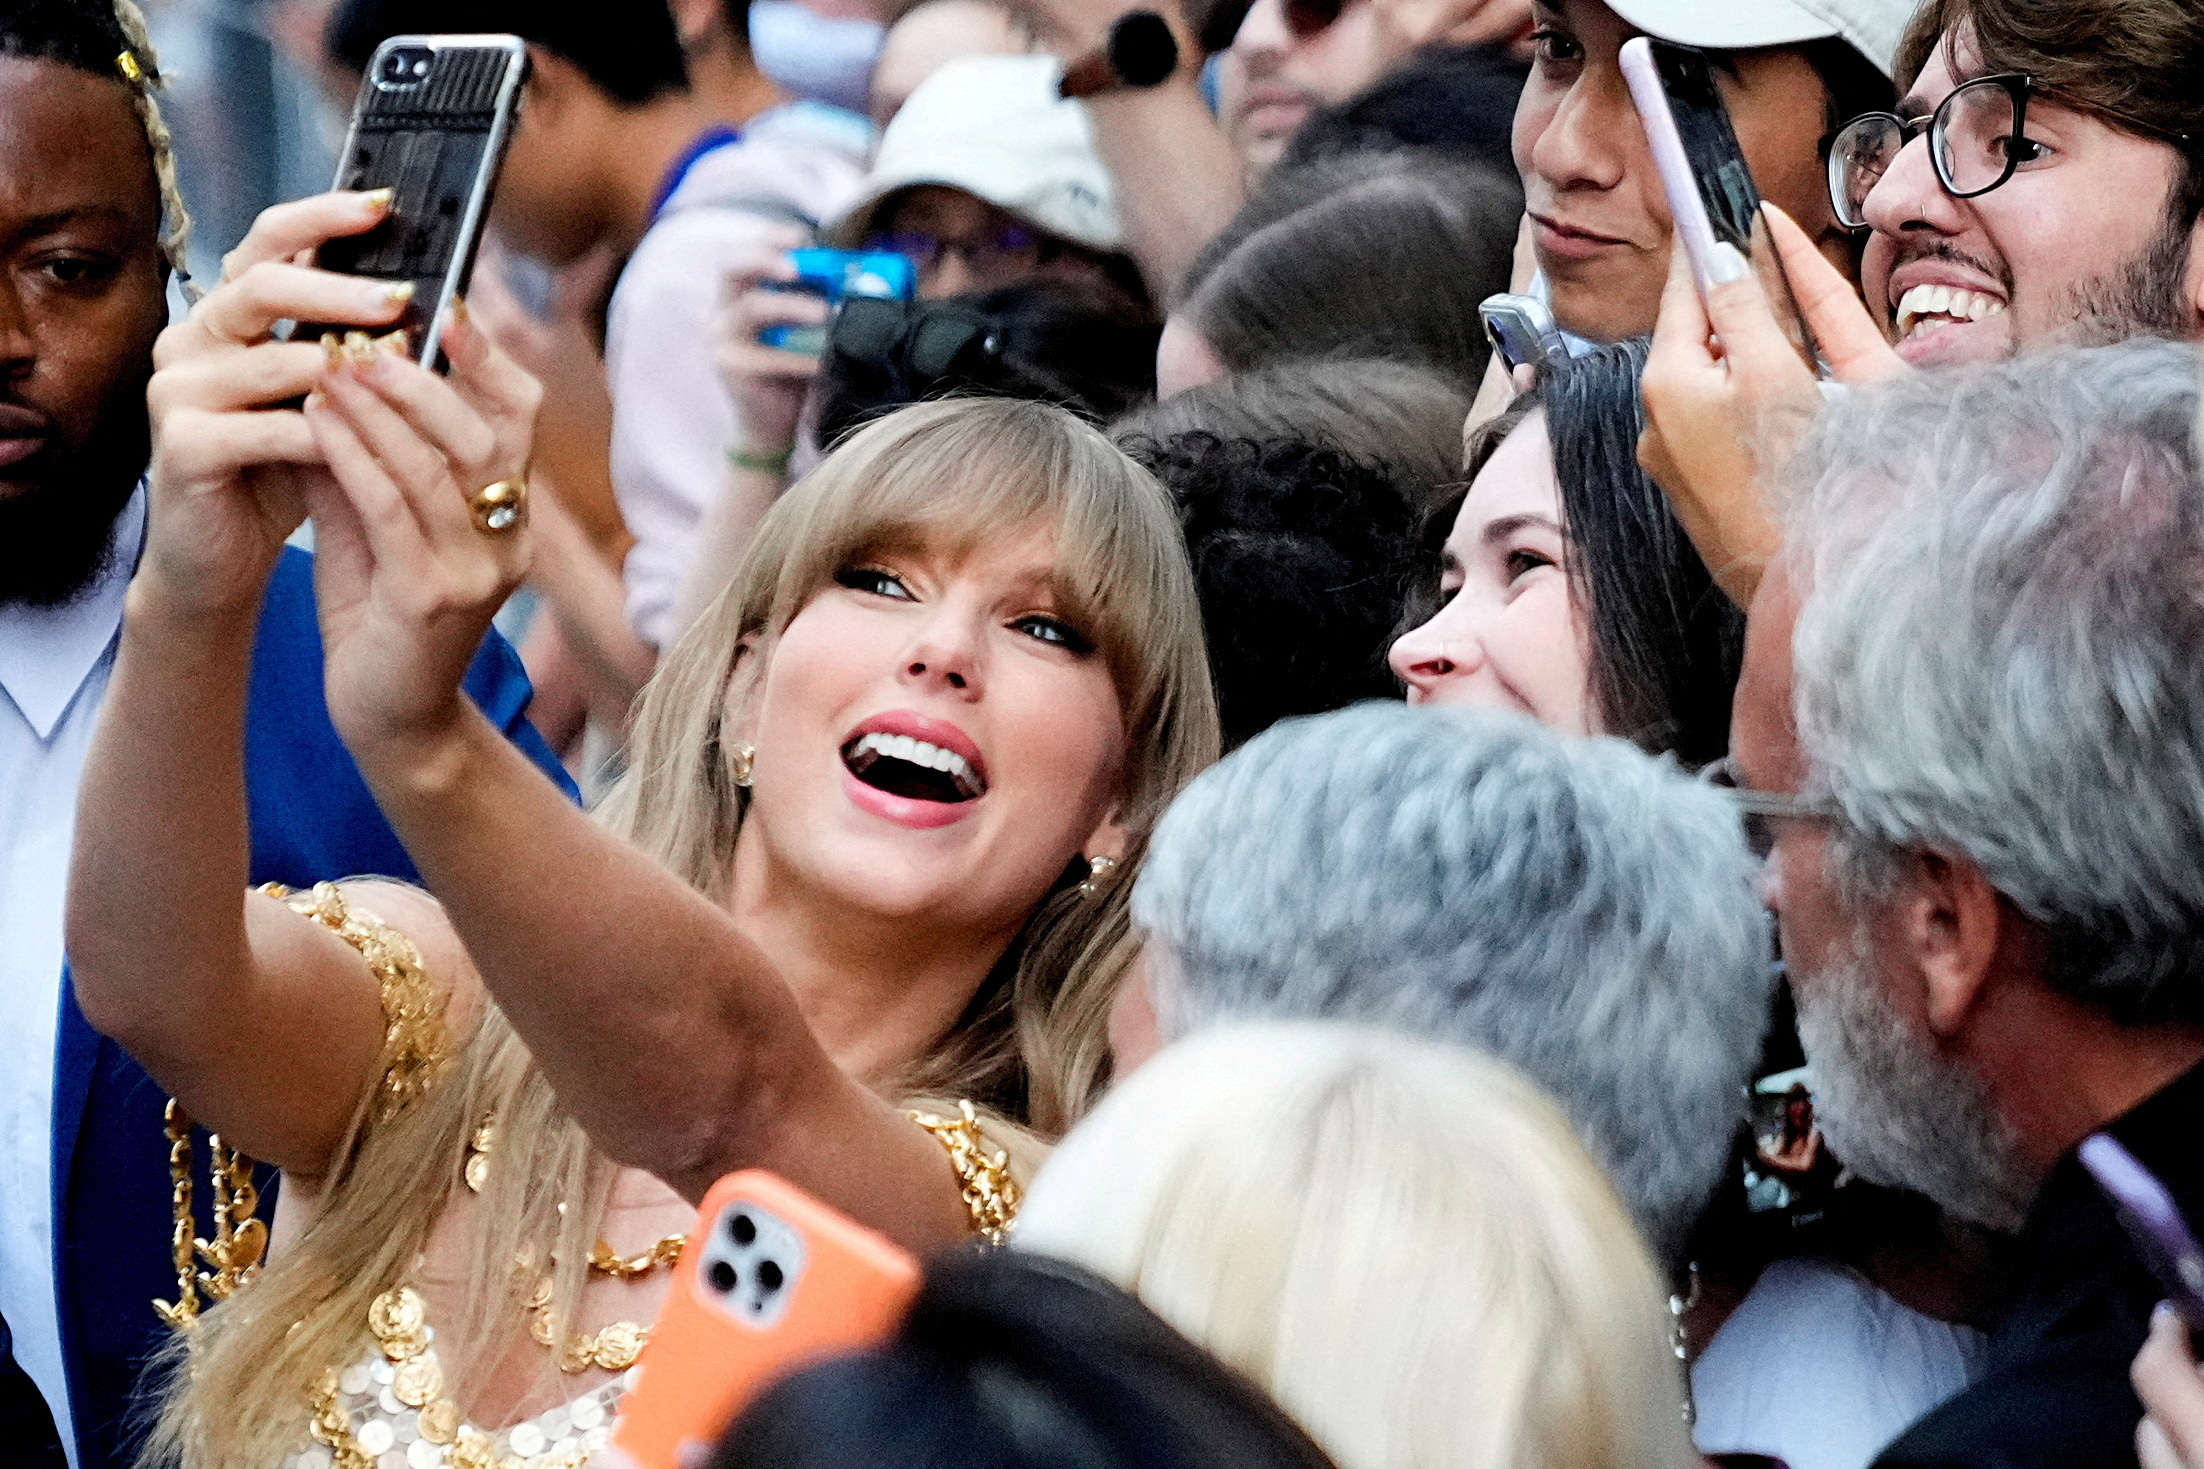 Blocked Full Hd Video - Taylor Swift searches blocked on X after fake explicit images spread |  Reuters